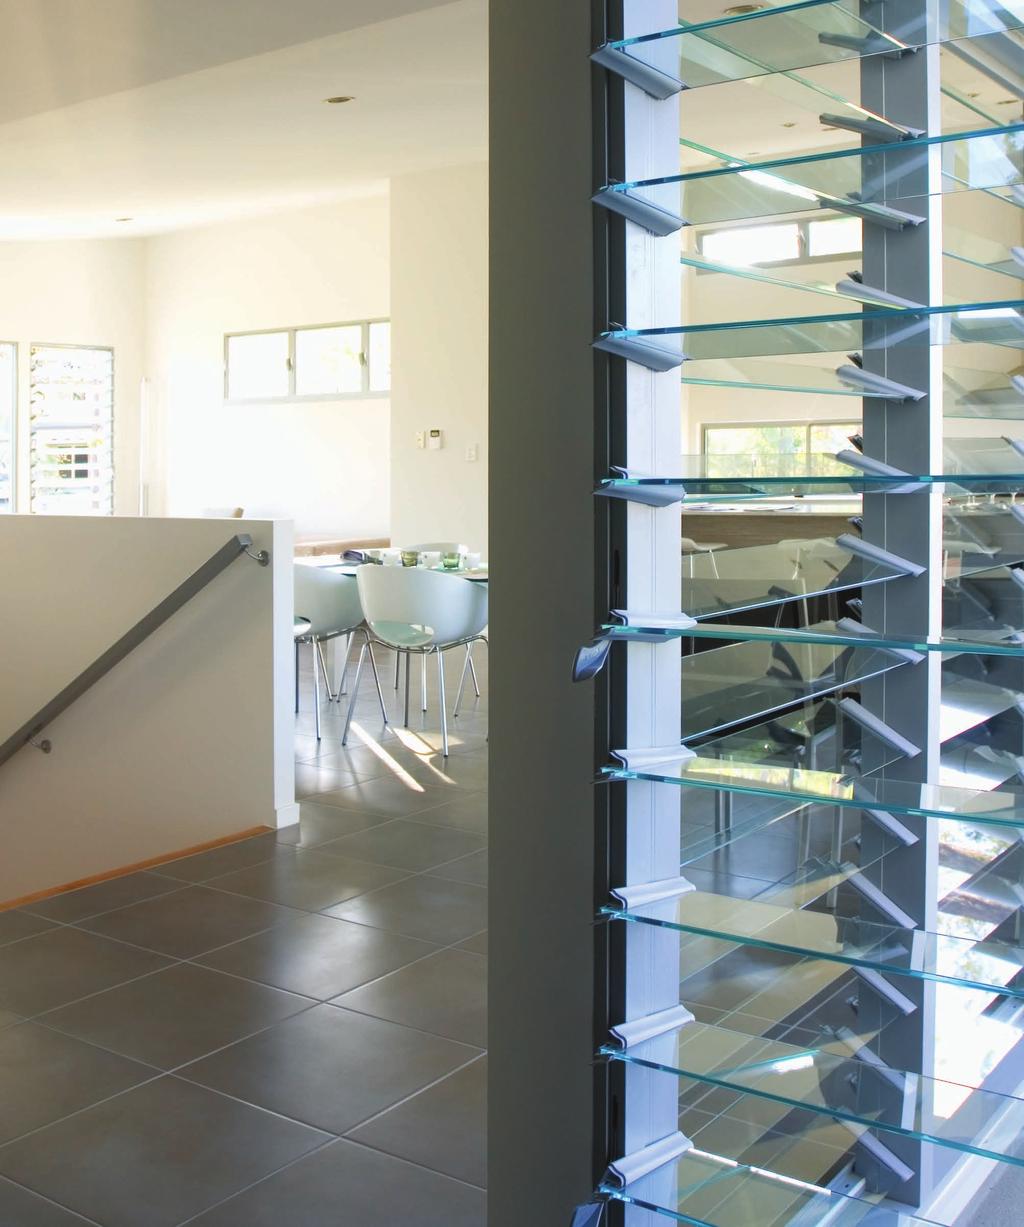 Altair Louvre Windows by Breezway We think that Breezway Louvre Windows are the best type of window available. They re stylish, versatile, energy efficient and totally customisable.